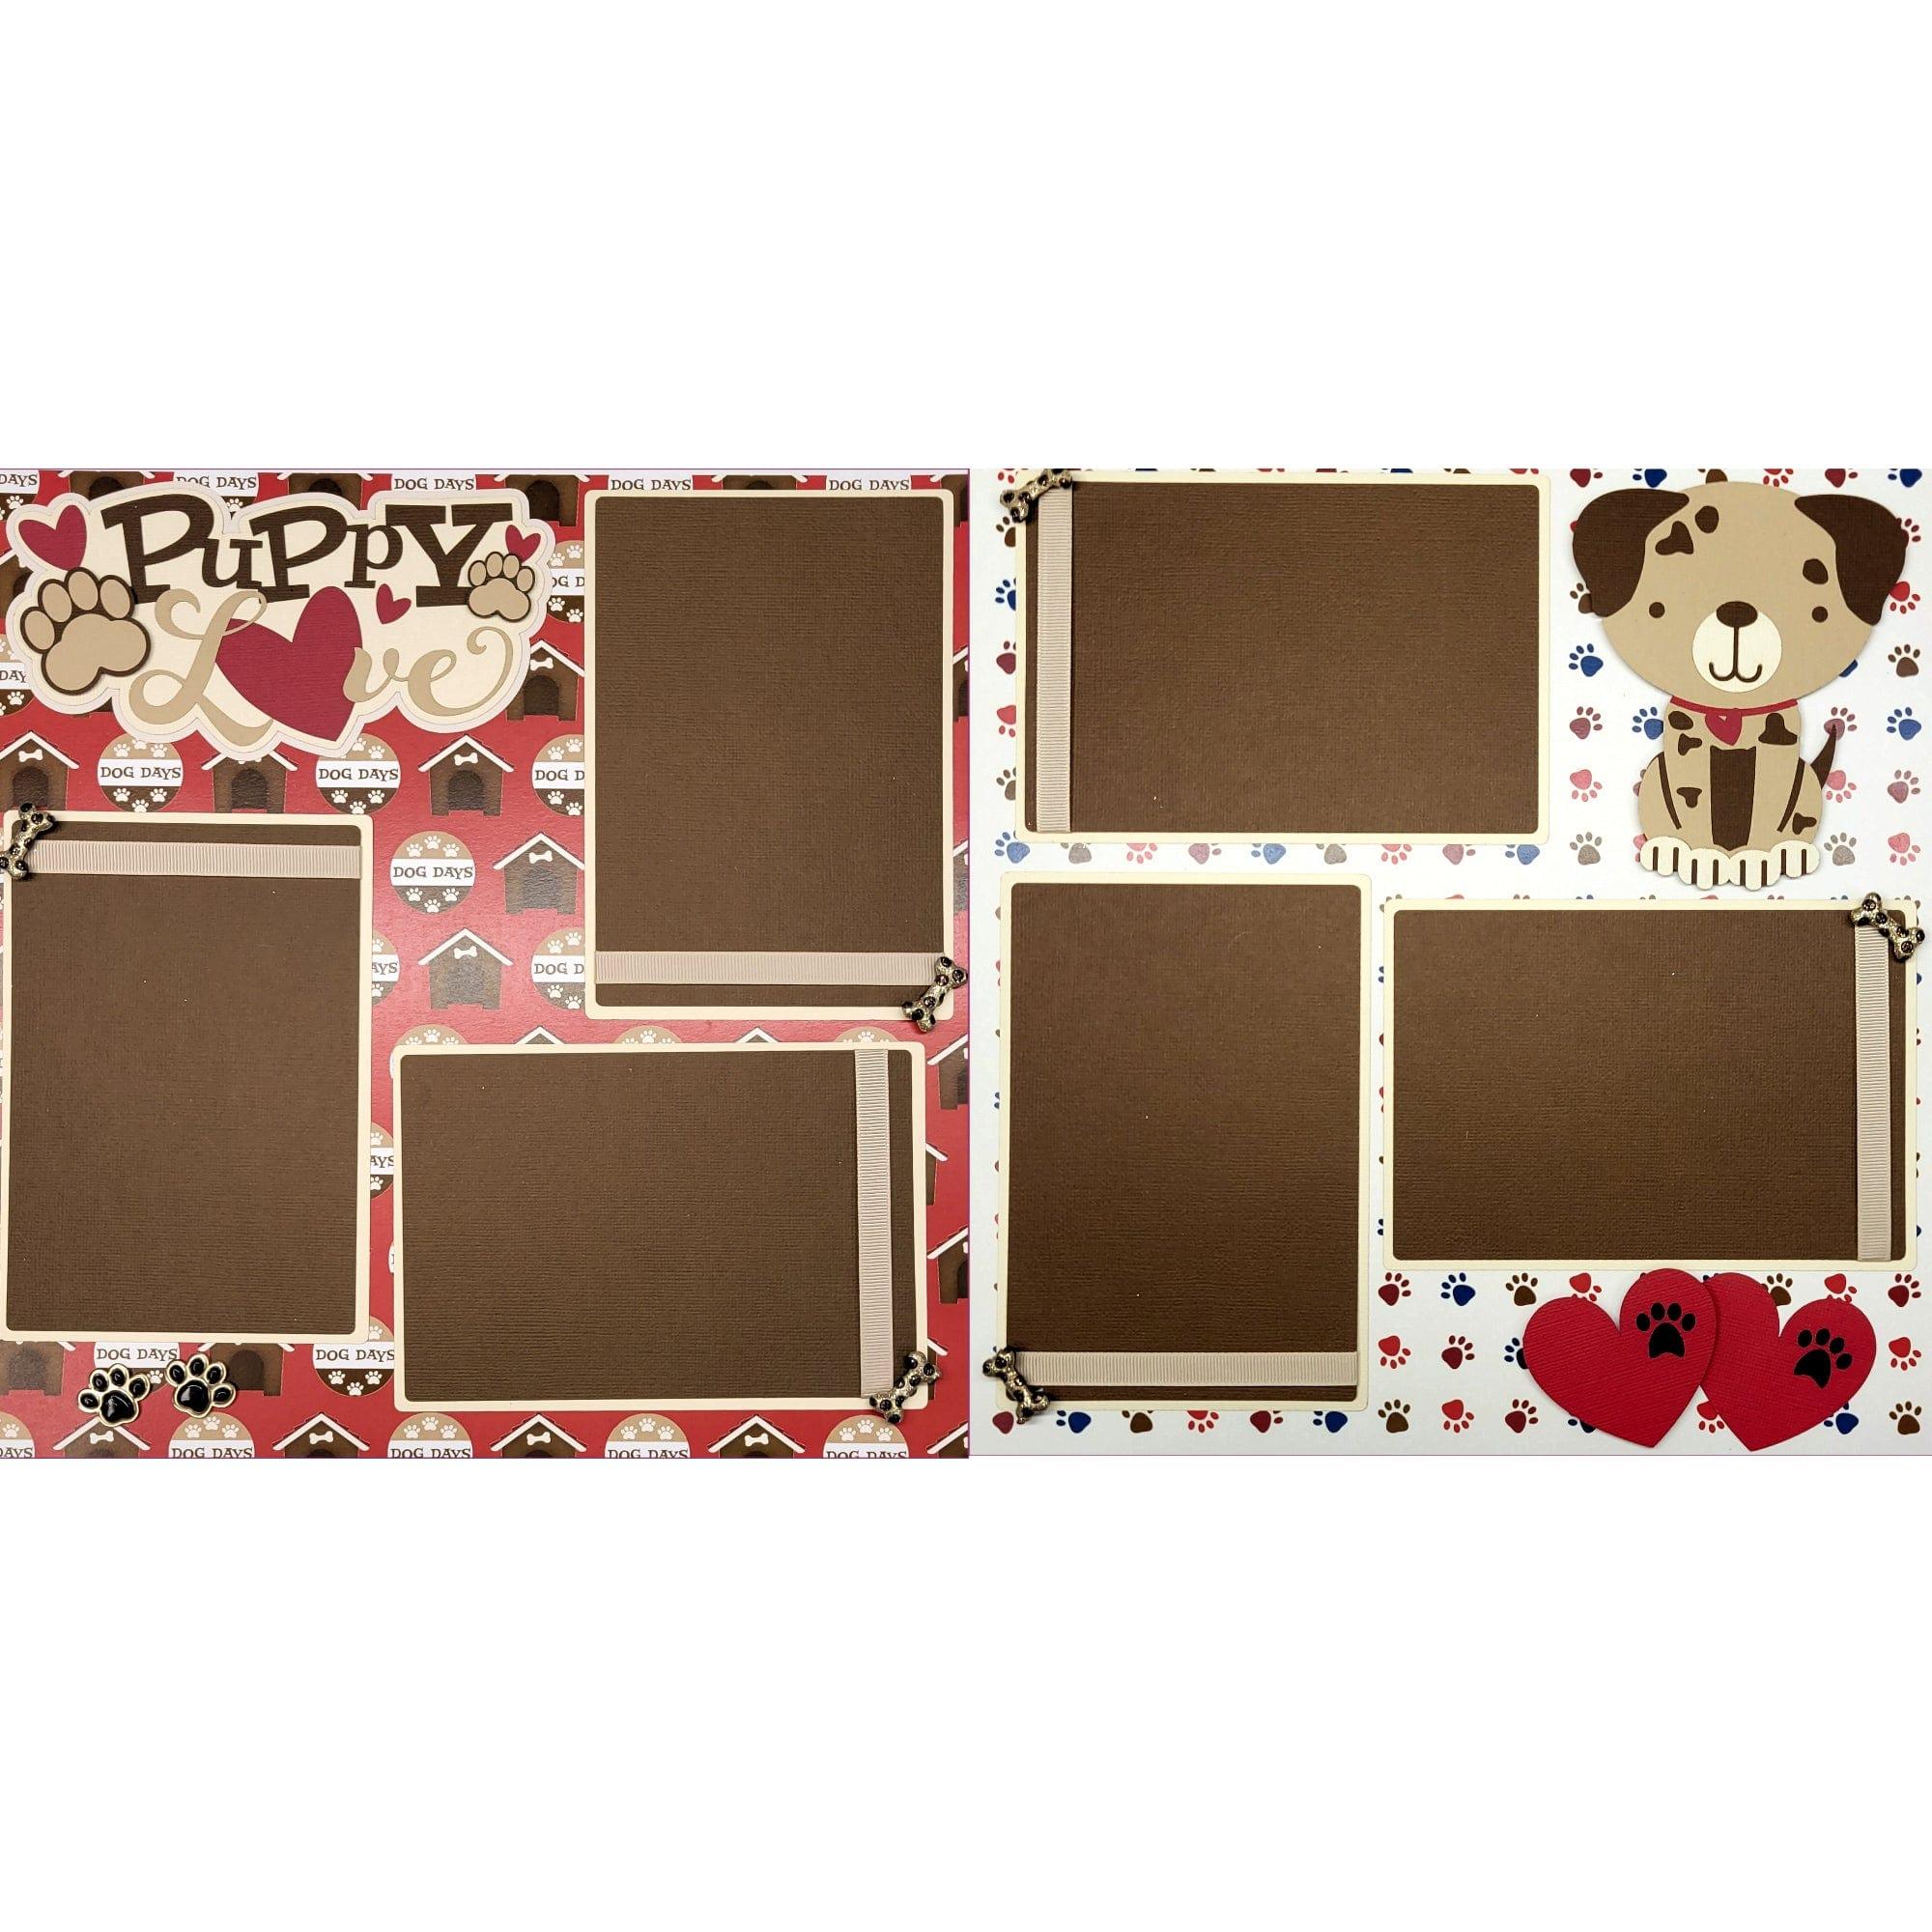 Puppy Love (2) - 12 x 12 Pages, Fully-Assembled & Hand-Crafted 3D Scrapbook Premade by SSC Designs